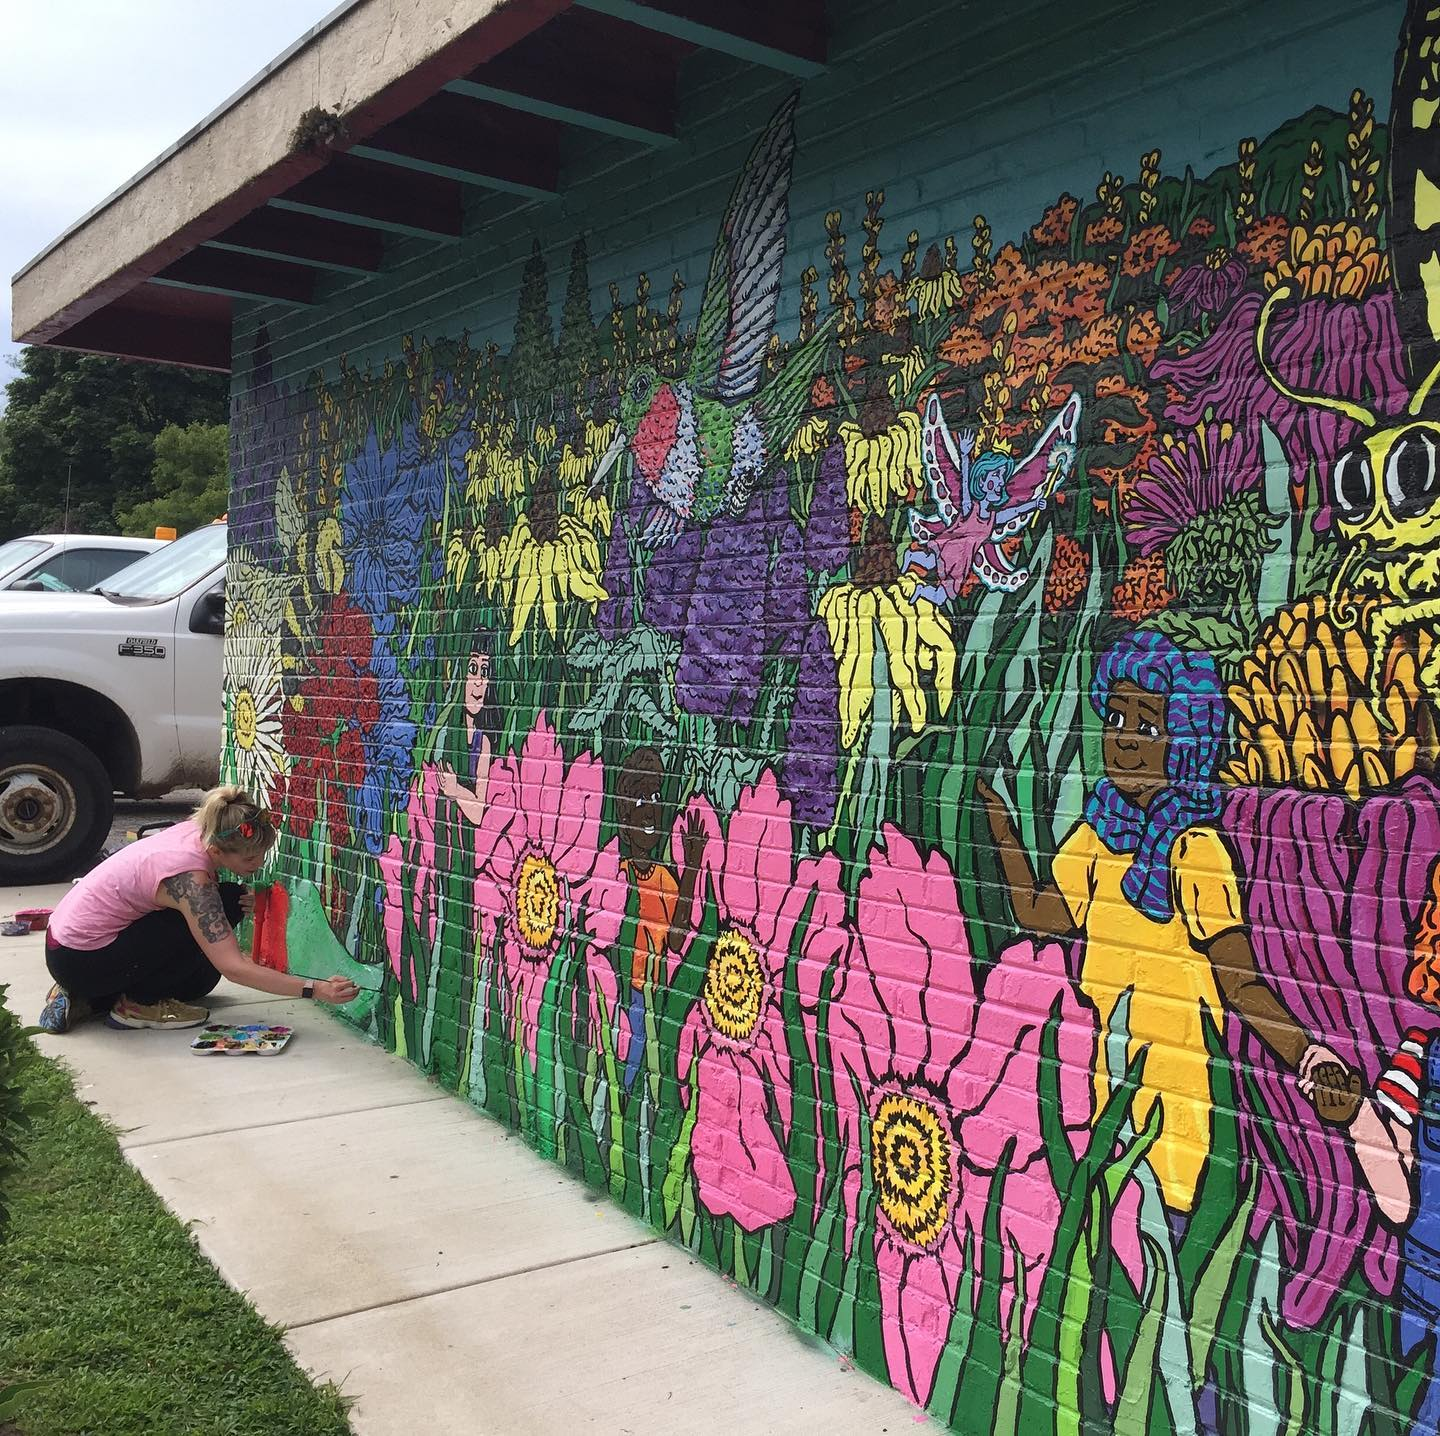 Mural+by+Cheri+Lee+Charlton+at+Ridgeville+Park+District.+The+mural+was+one+of+two+created+as+part+of+the+Evanston+Mural+Arts+Program+since+March+2020